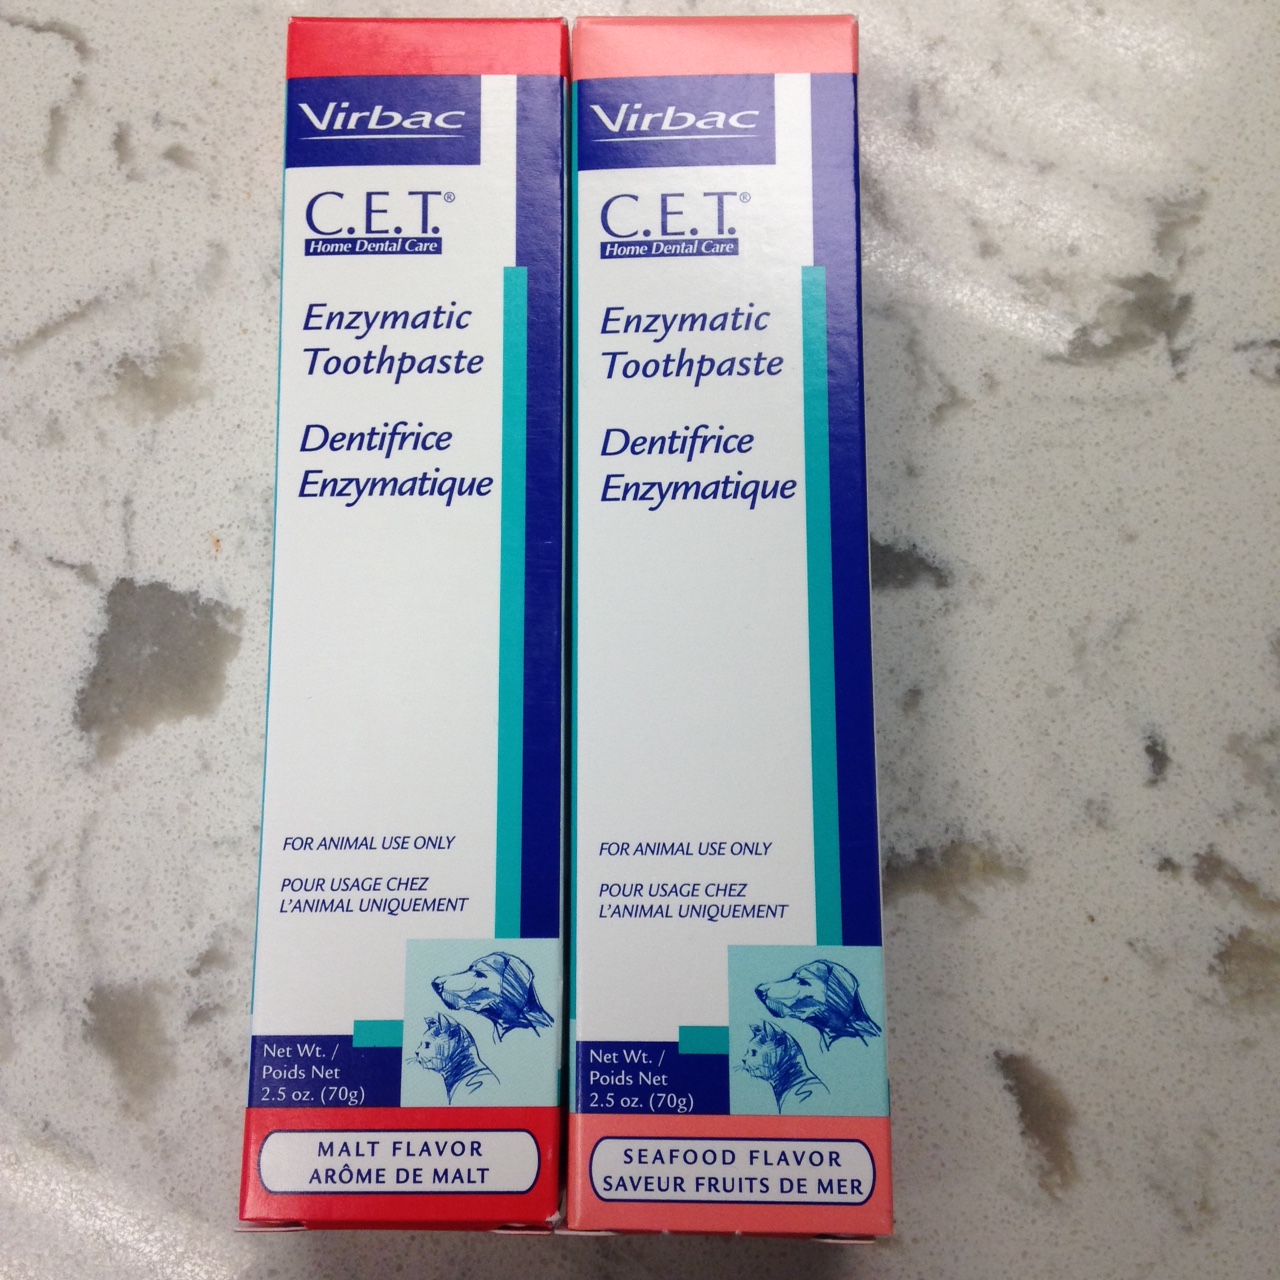 Two boxes of Virbac CET enzymatic toothpaste